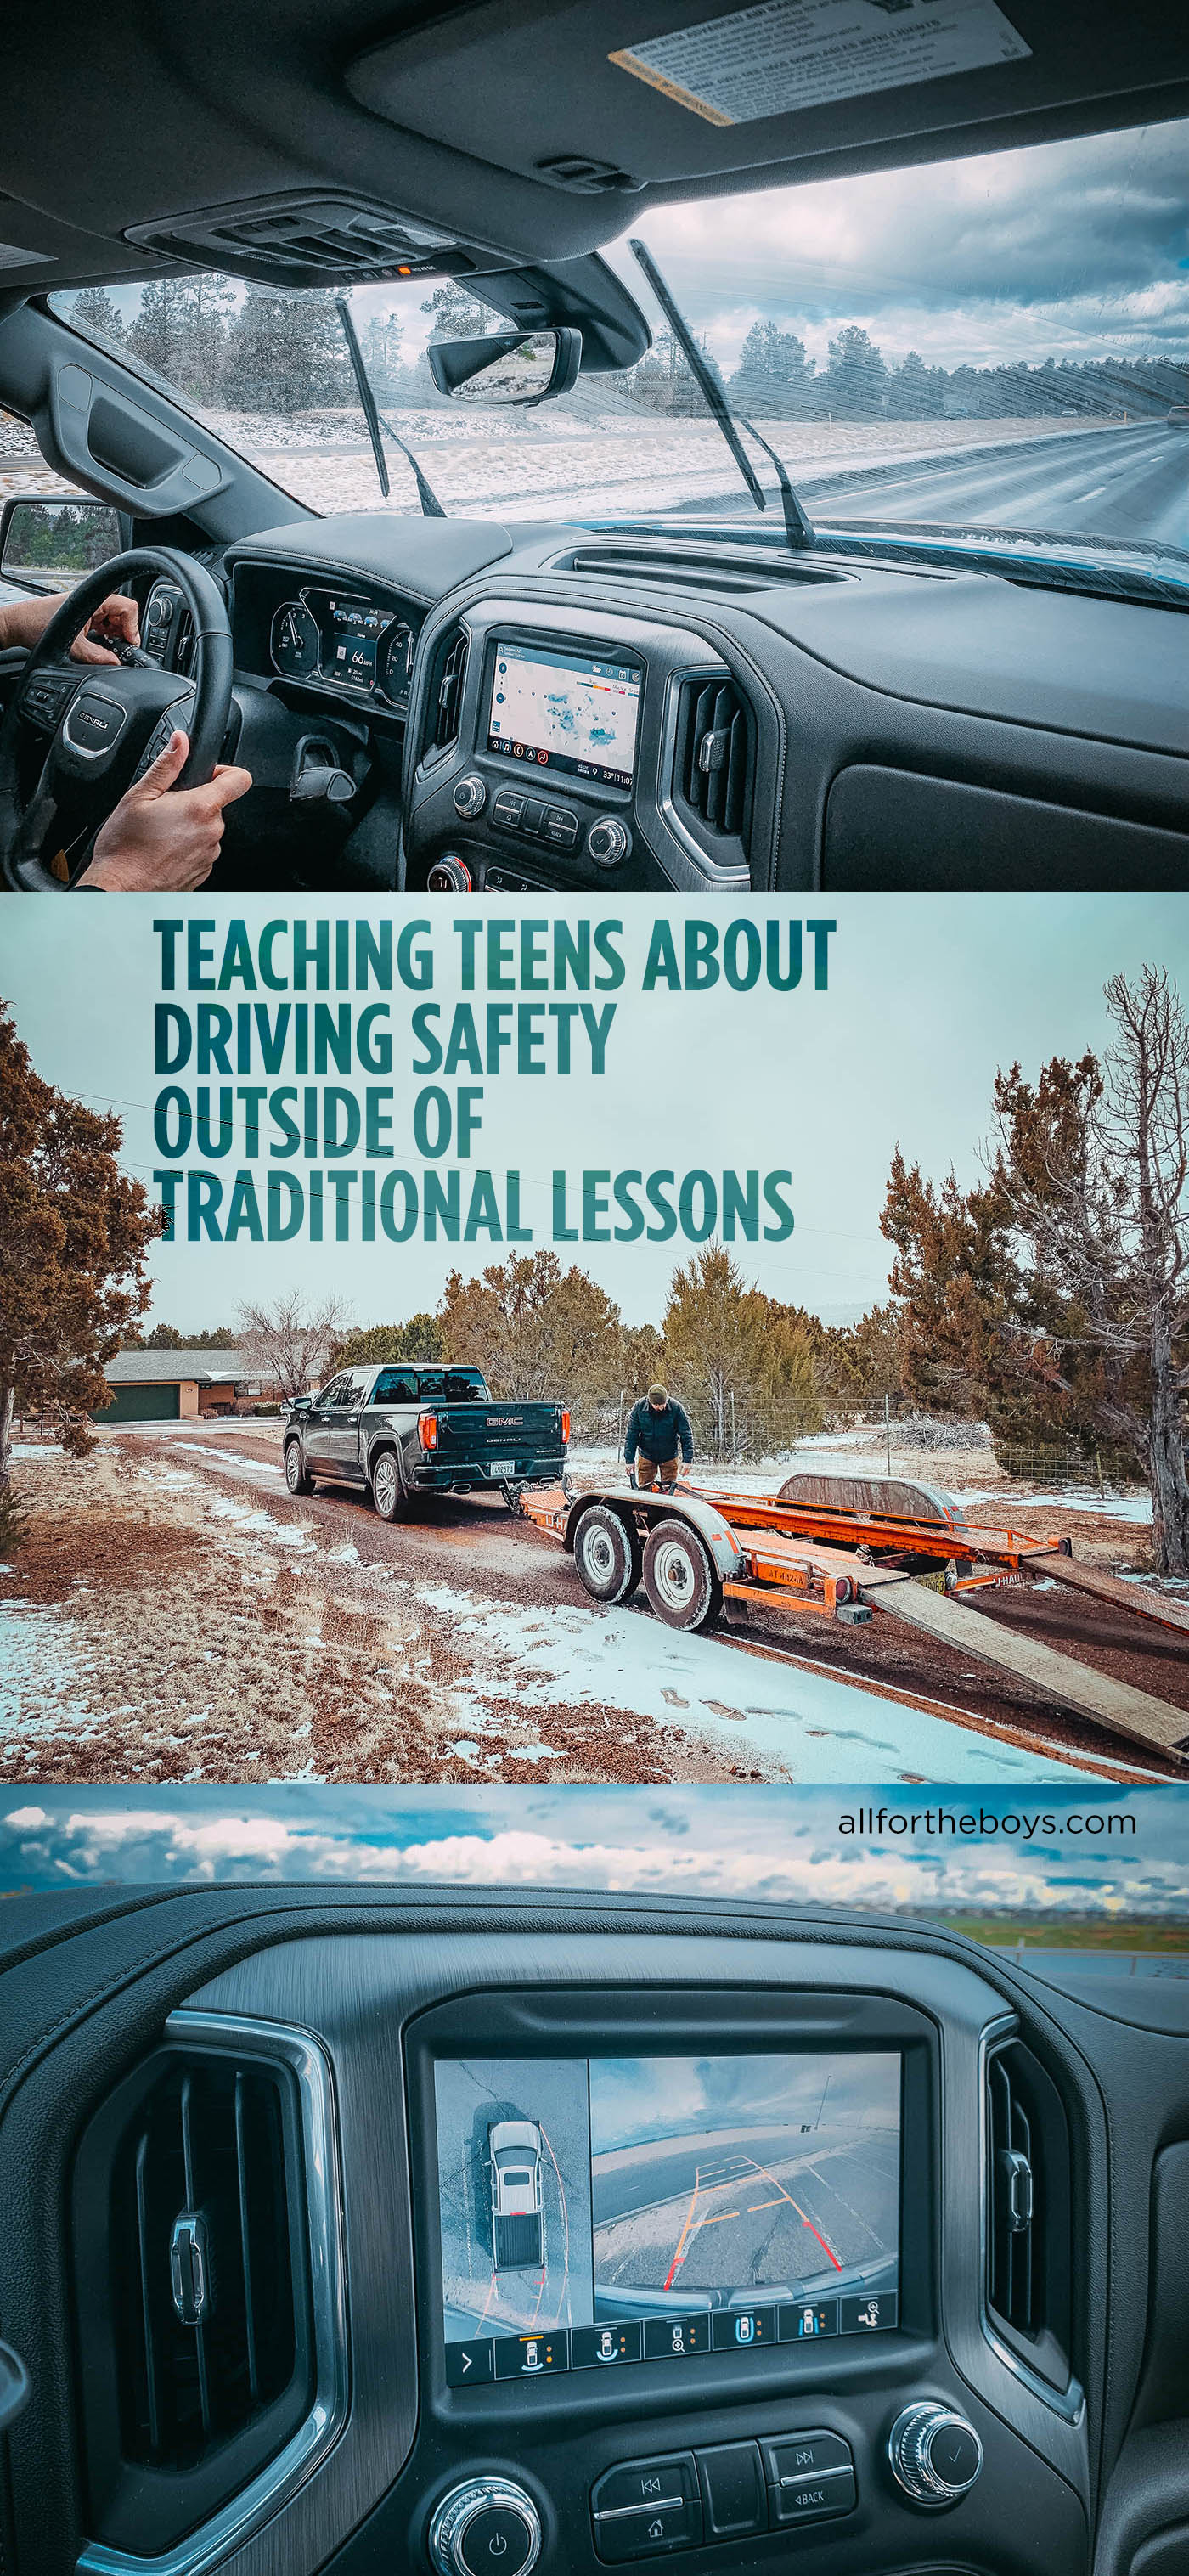 Teaching Teens About Driving Safety Beyond Traditional Lessons